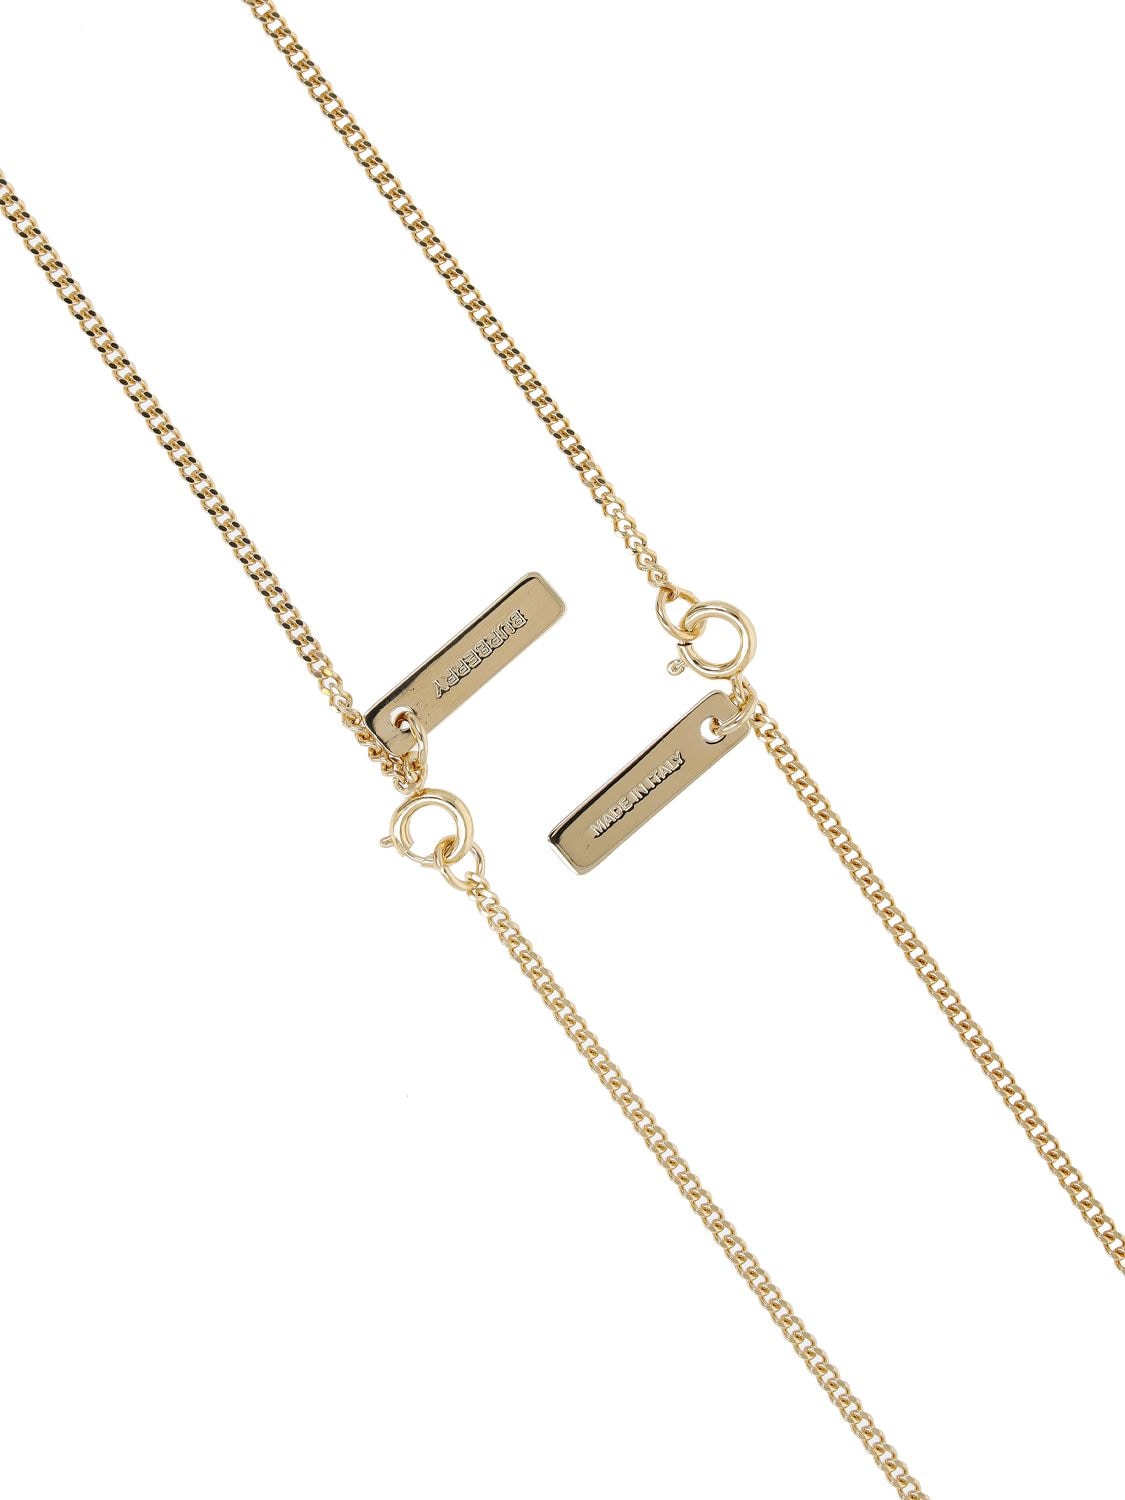 Shop Burberry & Love Letter Necklace In Gold